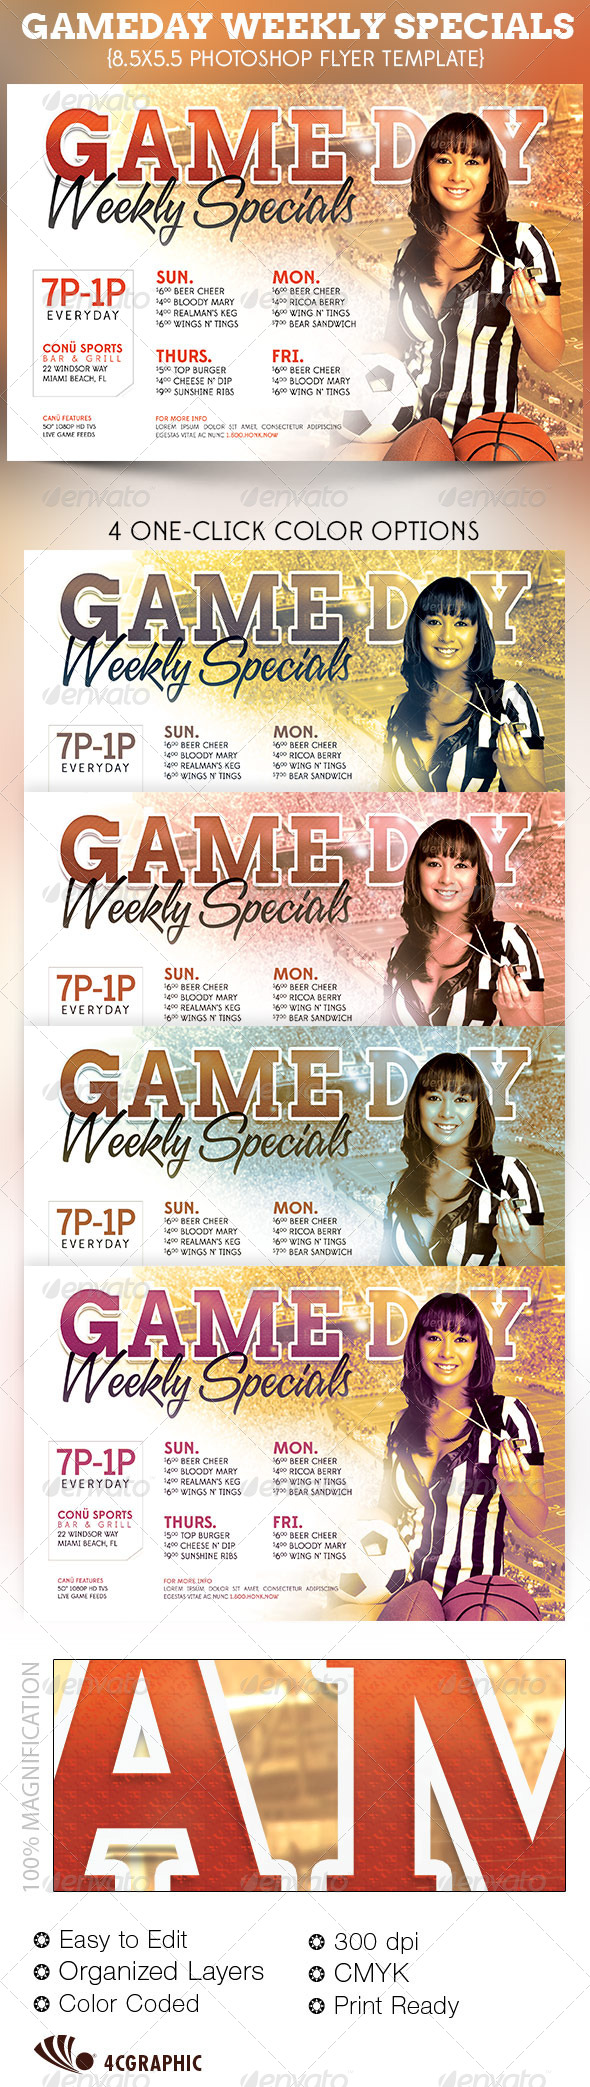 Game Day Specials Flyer Template by 4cgraphic GraphicRiver